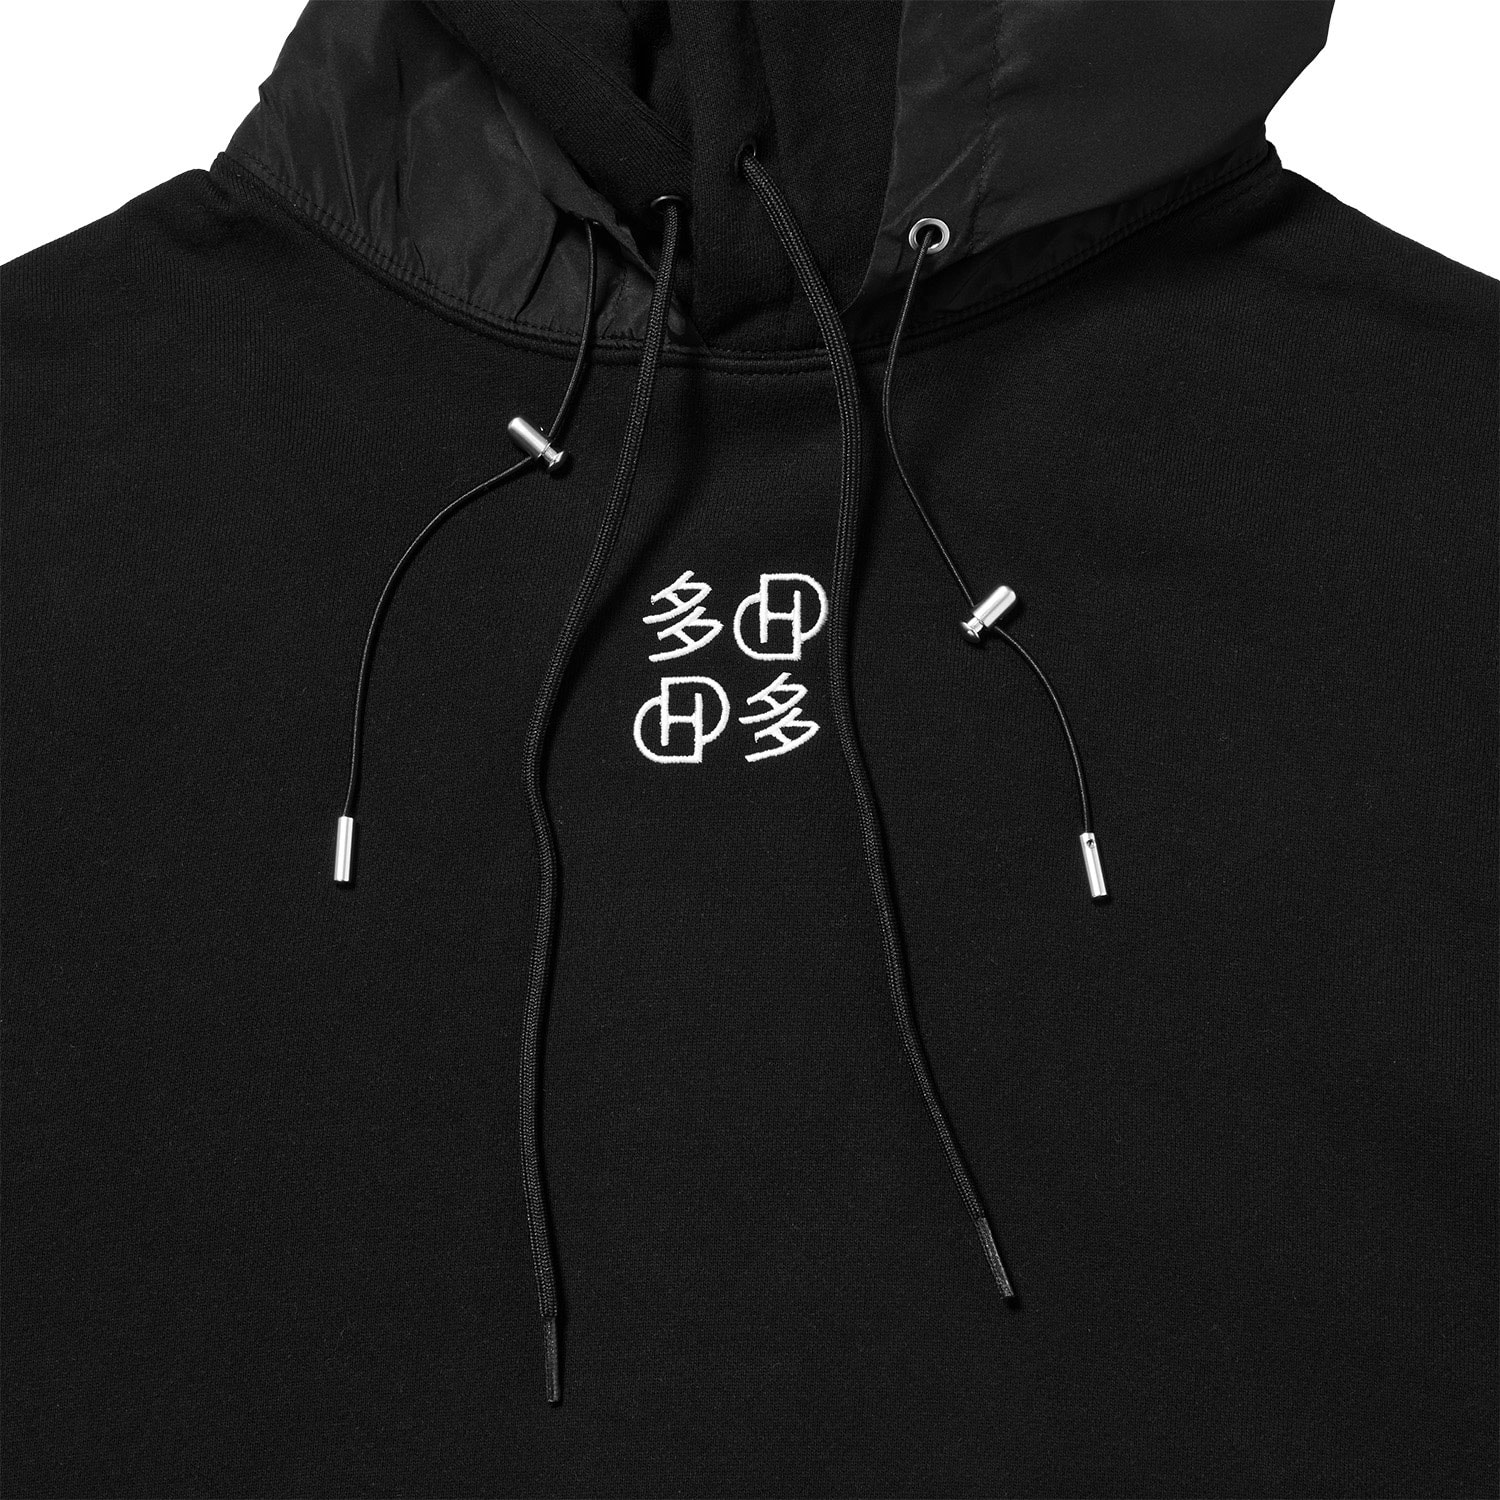 dada dheygere collaboration logo double hoodie details